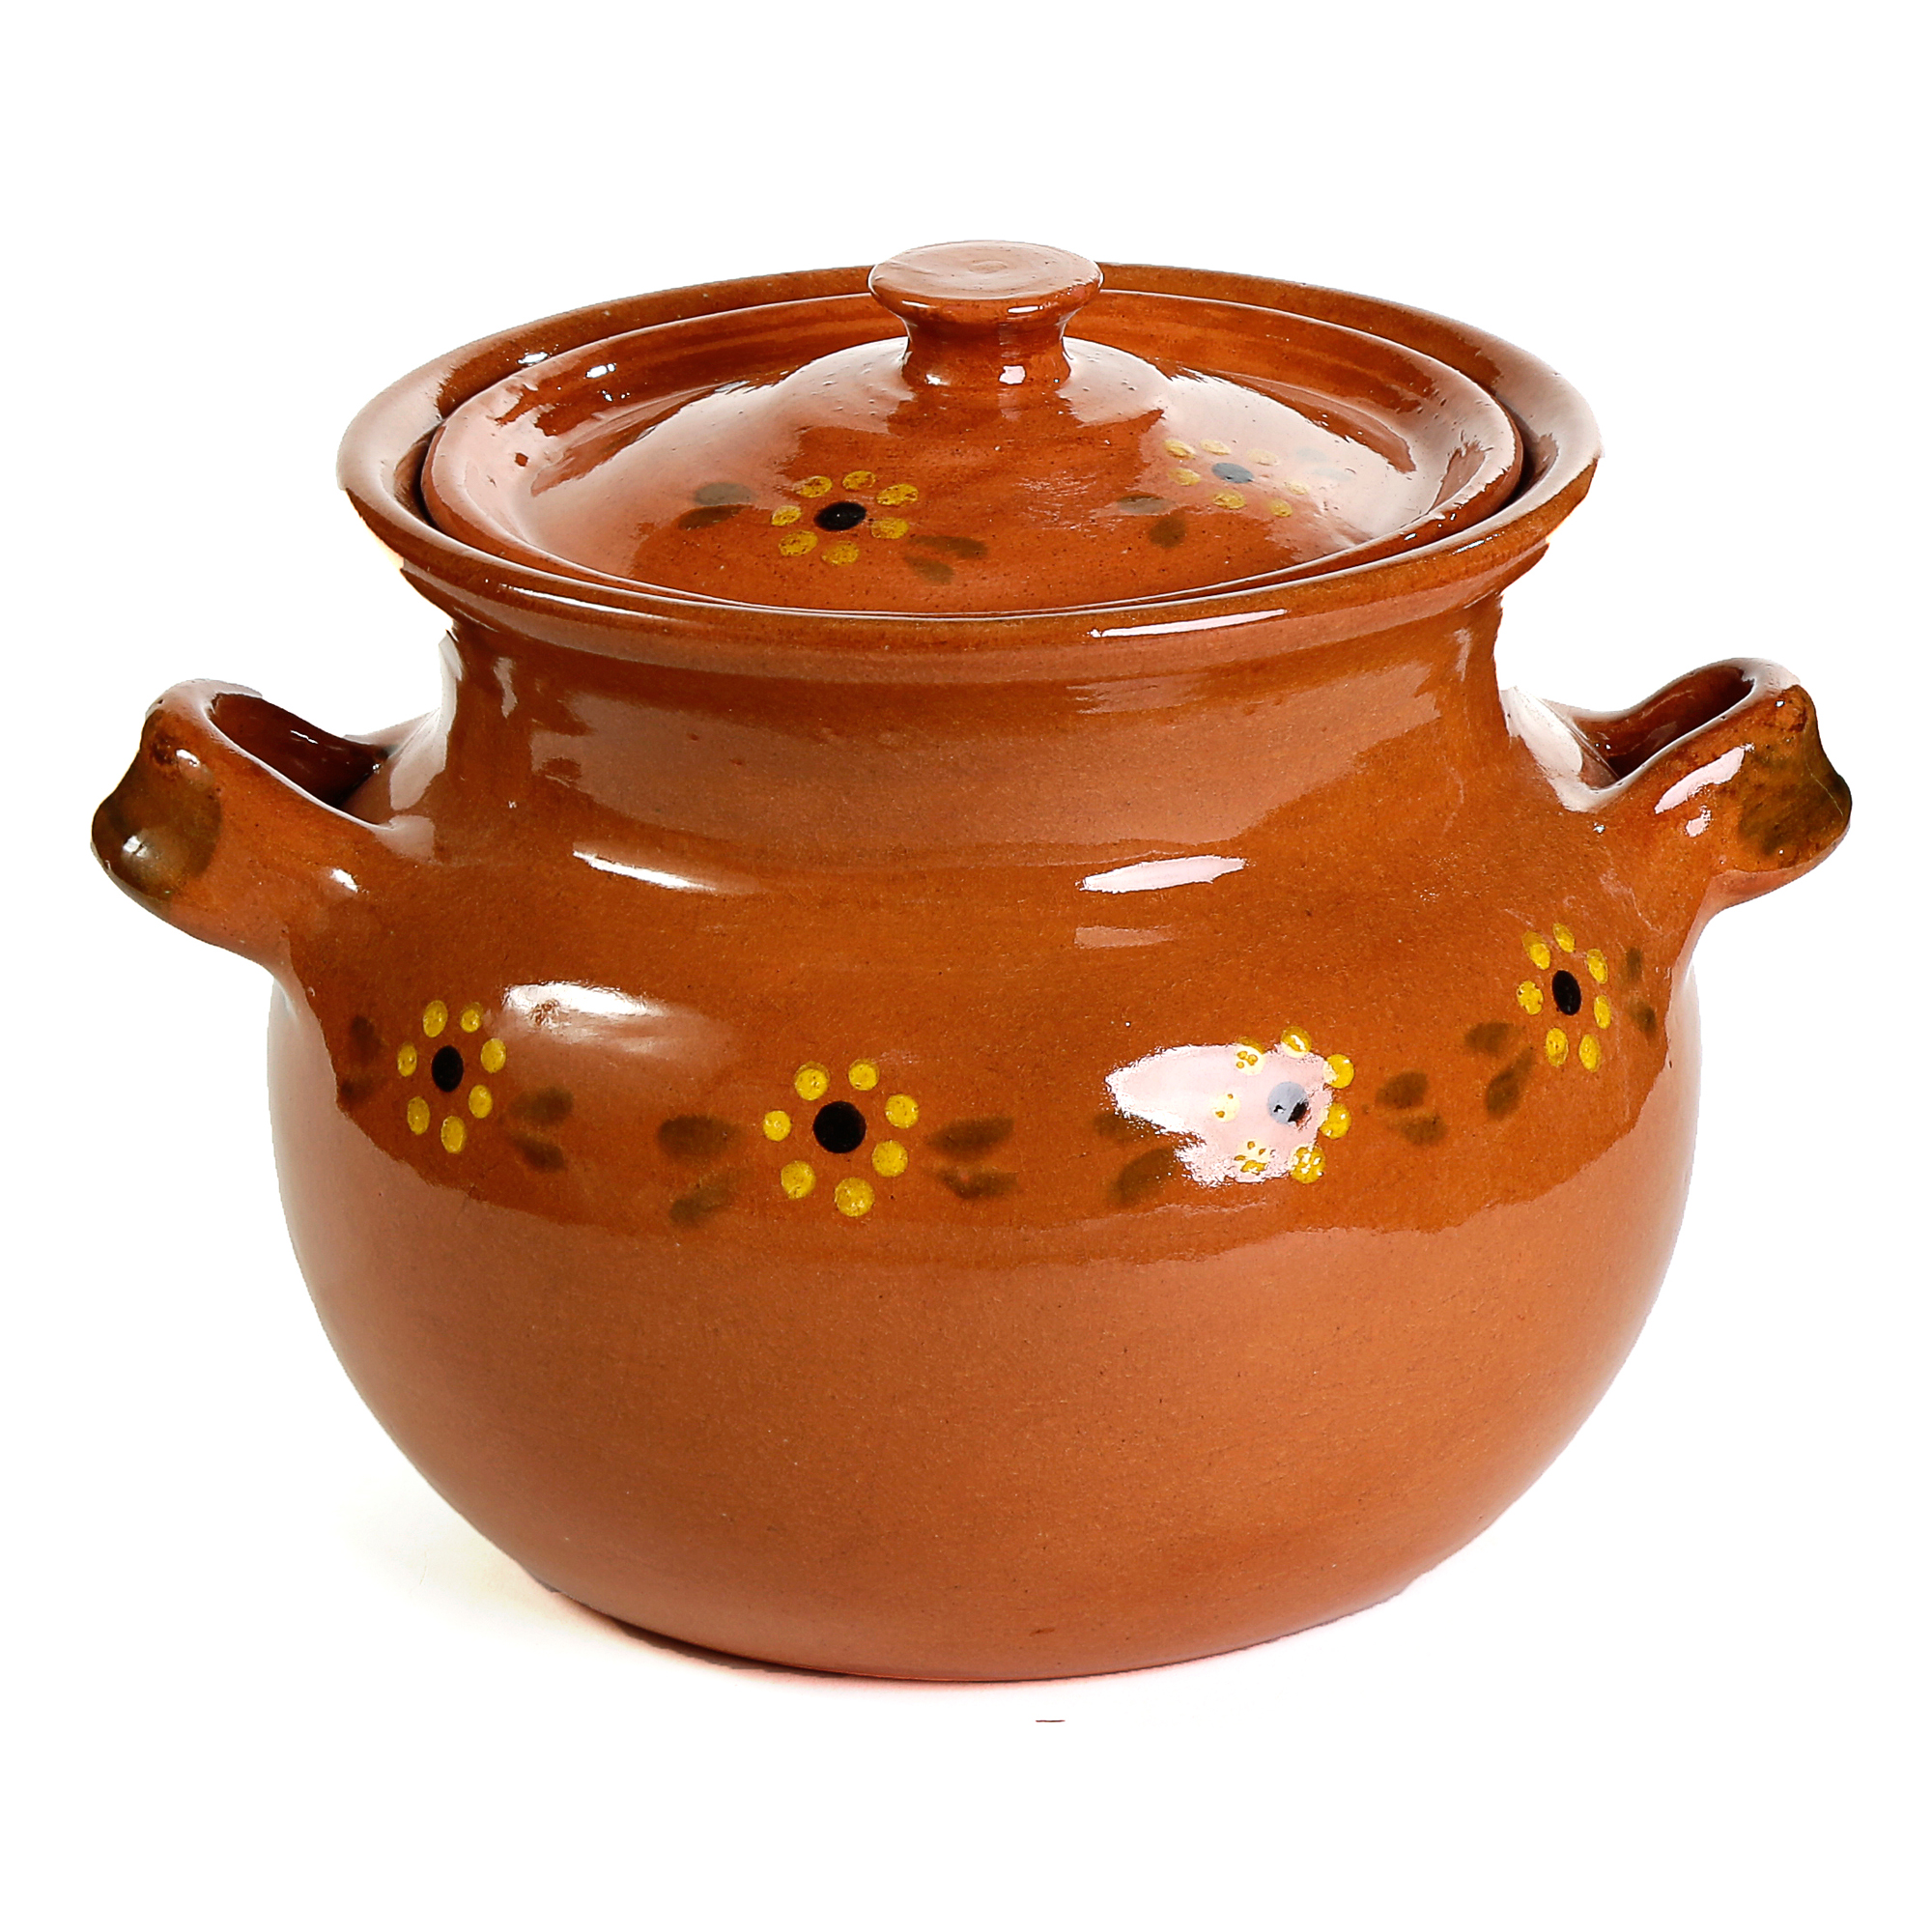 https://ancientcookware.com/images/stories/virtuemart/product/mex_3050_08_01_large.jpg